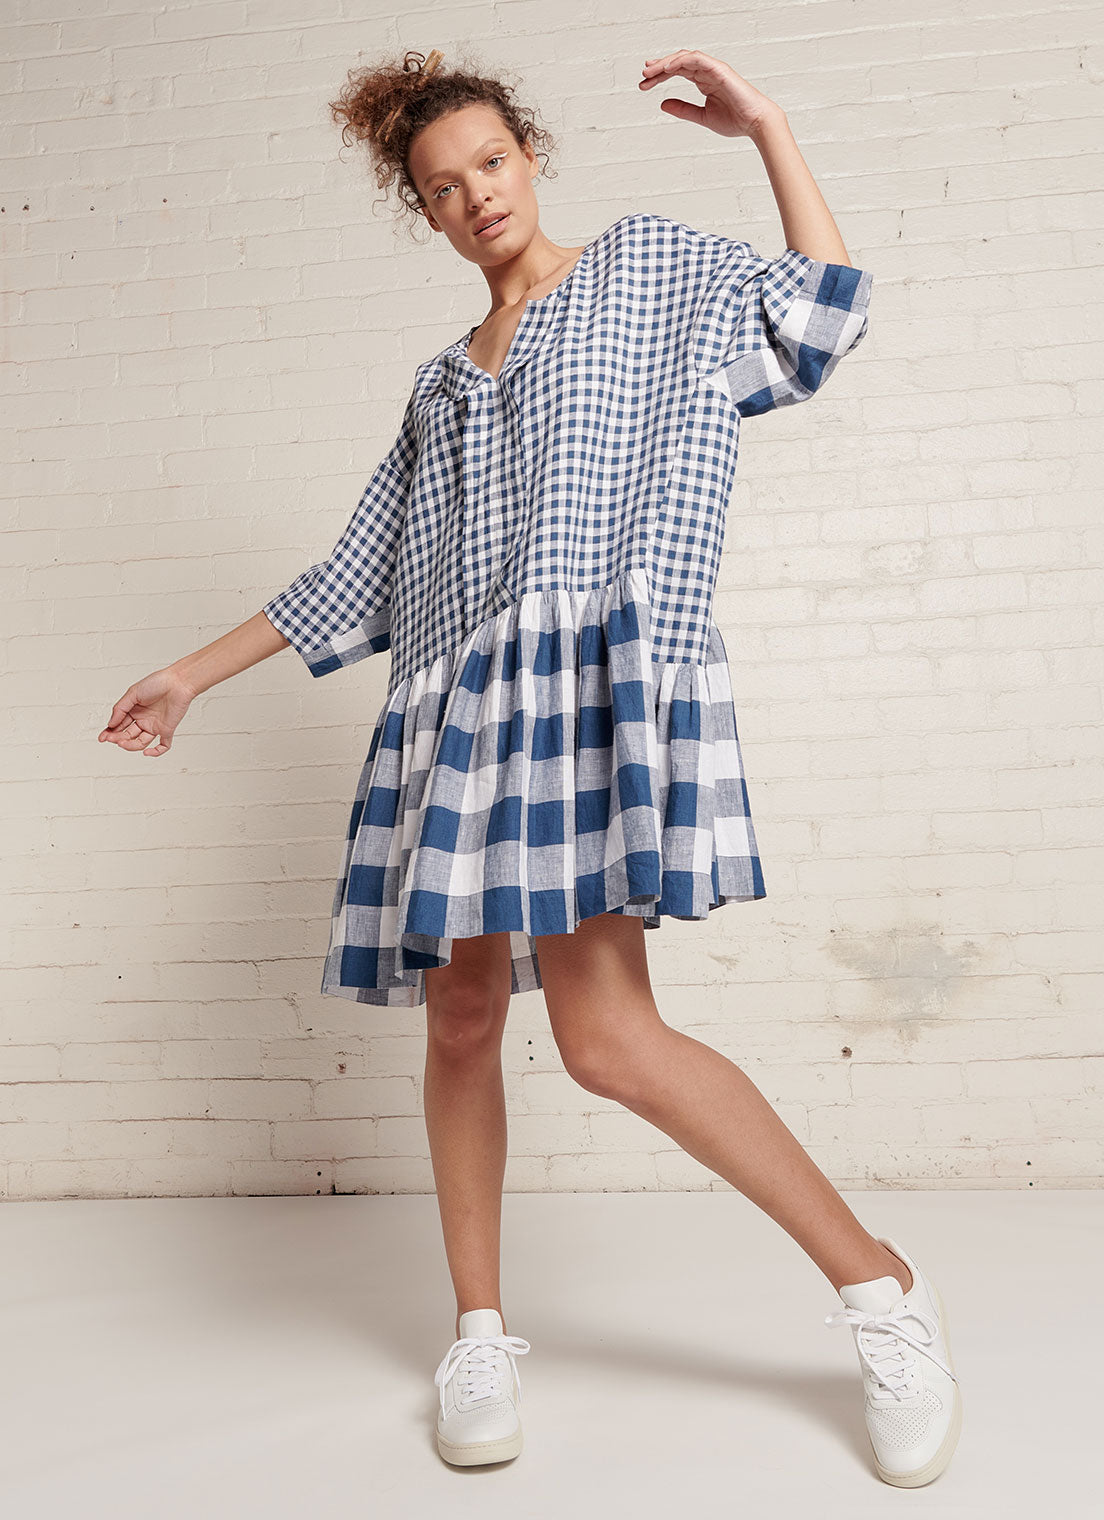 An indigo and white gingham, easy fit, knee-length, square-cut dress with open neckline, 3/4 sleeves, and gathered detailing made from mixed gingham yarn dye washed linen